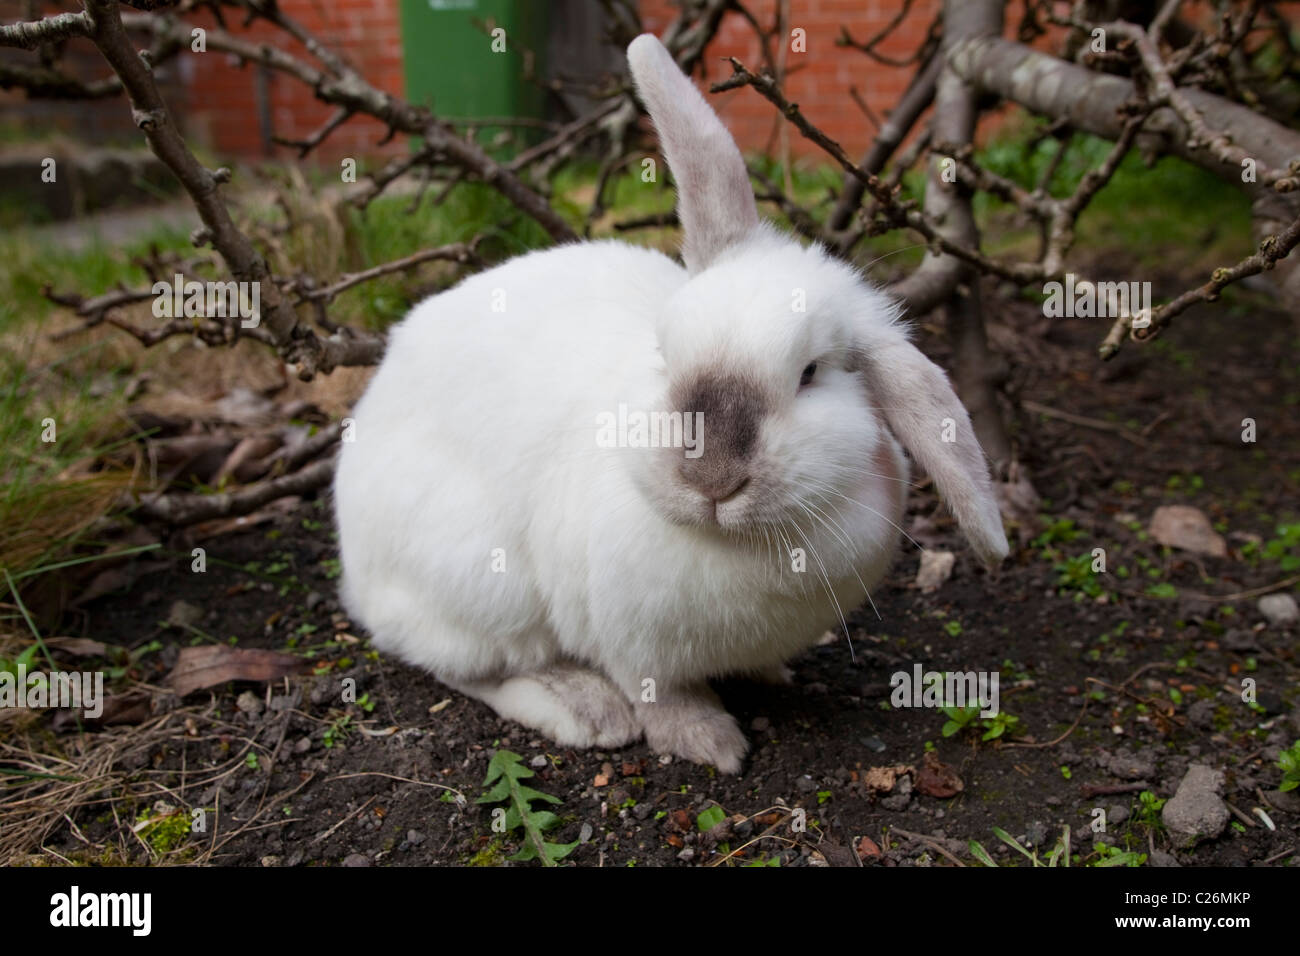 white-lop-rabbit-in-garden-with-one-ear-up-and-one-ear-down-leporidae-C26MKP.jpg